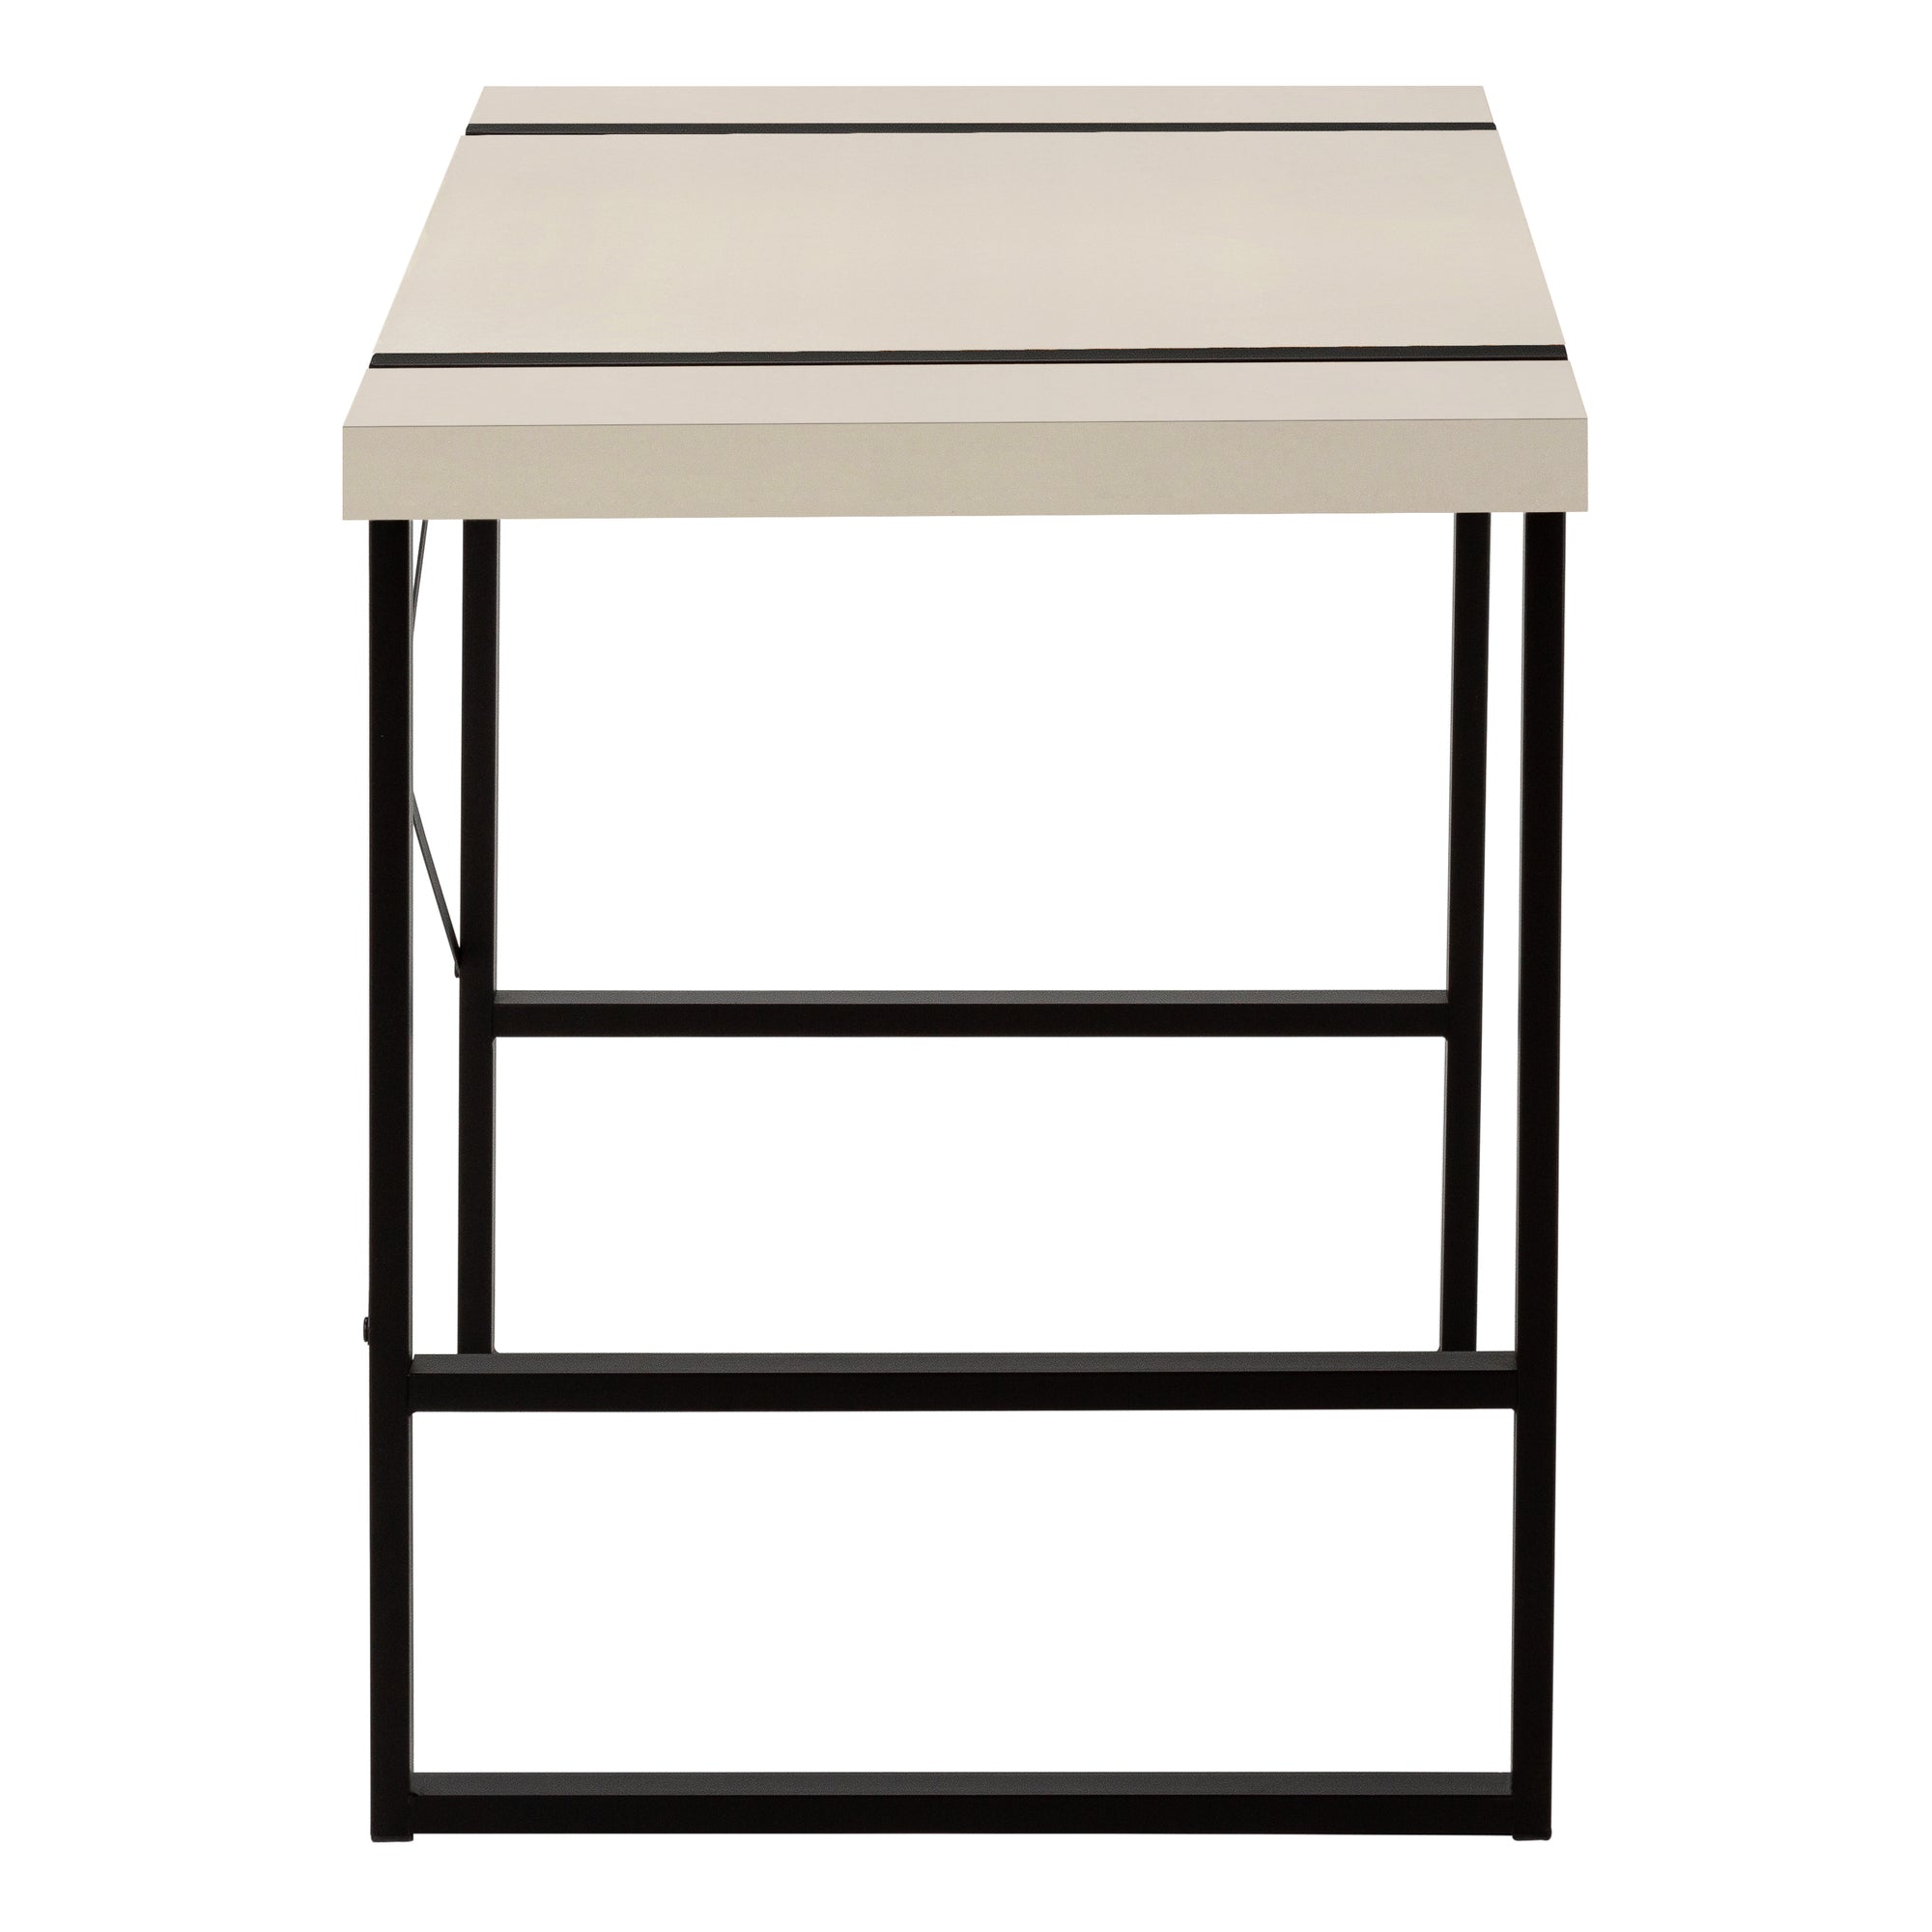 MN-607659    Computer Desk, Home Office, Laptop, 48"L, Metal, Laminate, Taupe, Black, Contemporary, Modern